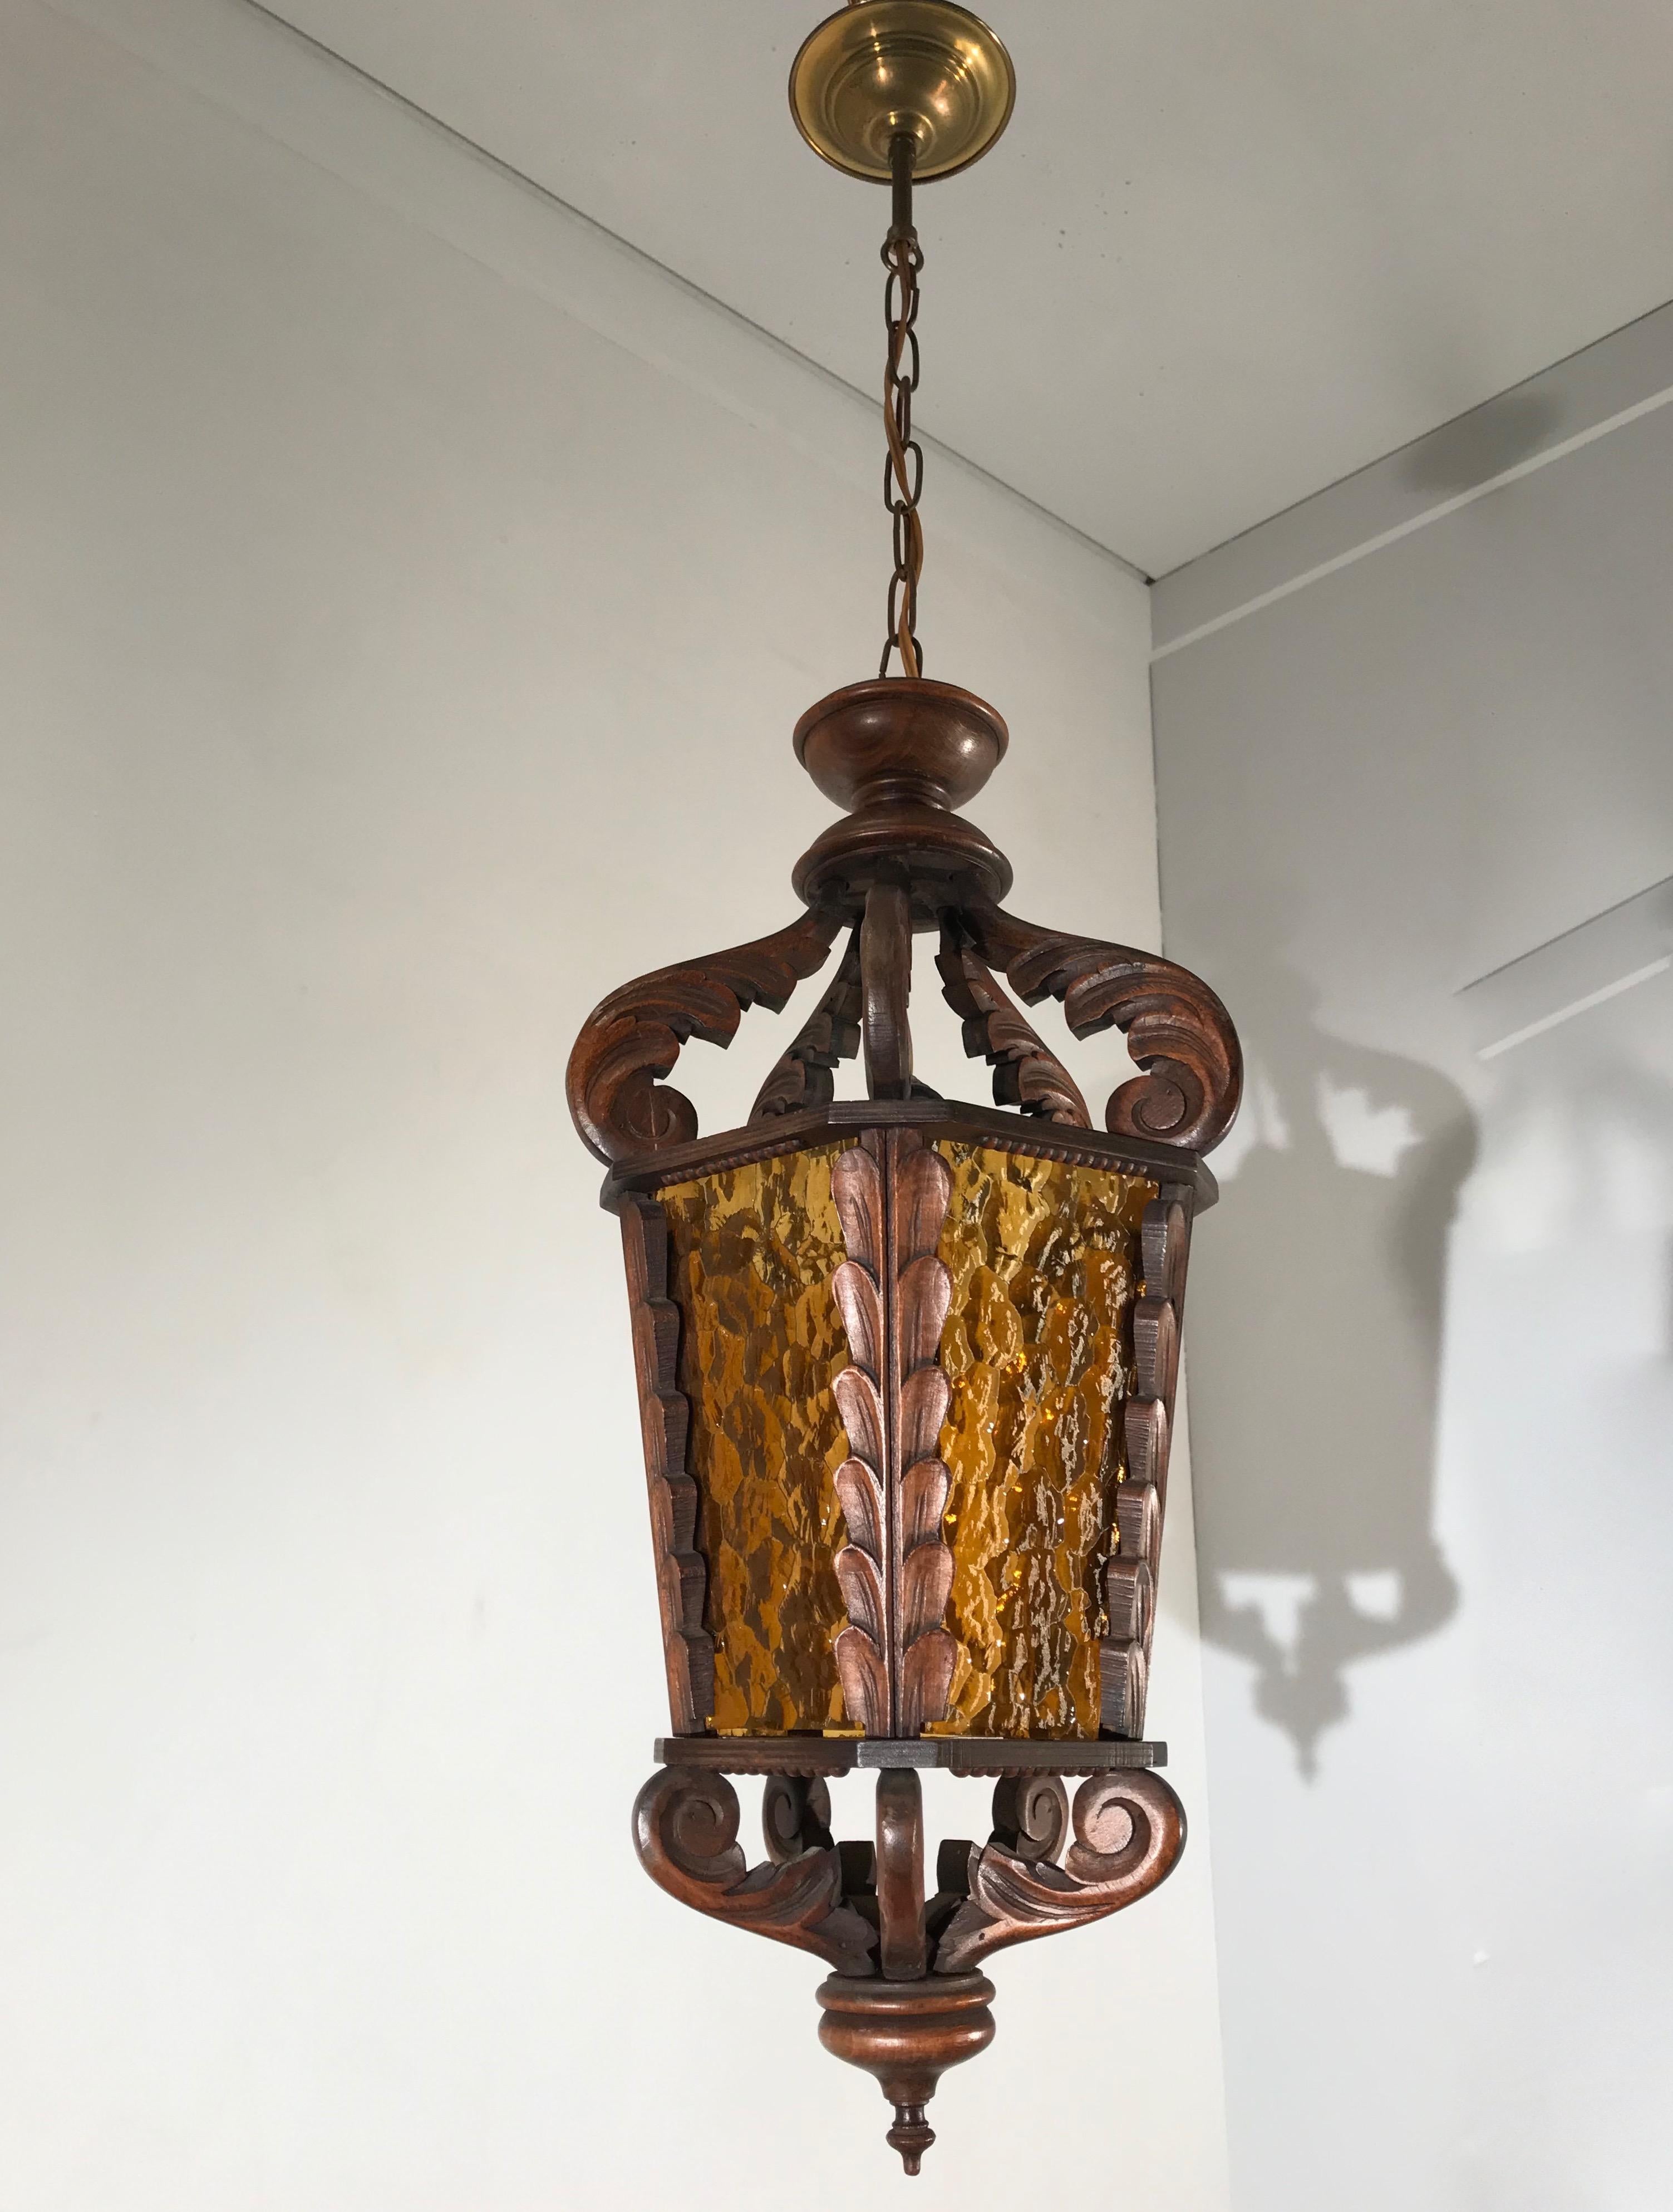 Large, handcrafted and great condition entry hall light fixture.

This vintage pendant is the first one of its kind that we ever had the pleasure of offering and it is in exceptional condition. We have completely rewired it for safe and immediate